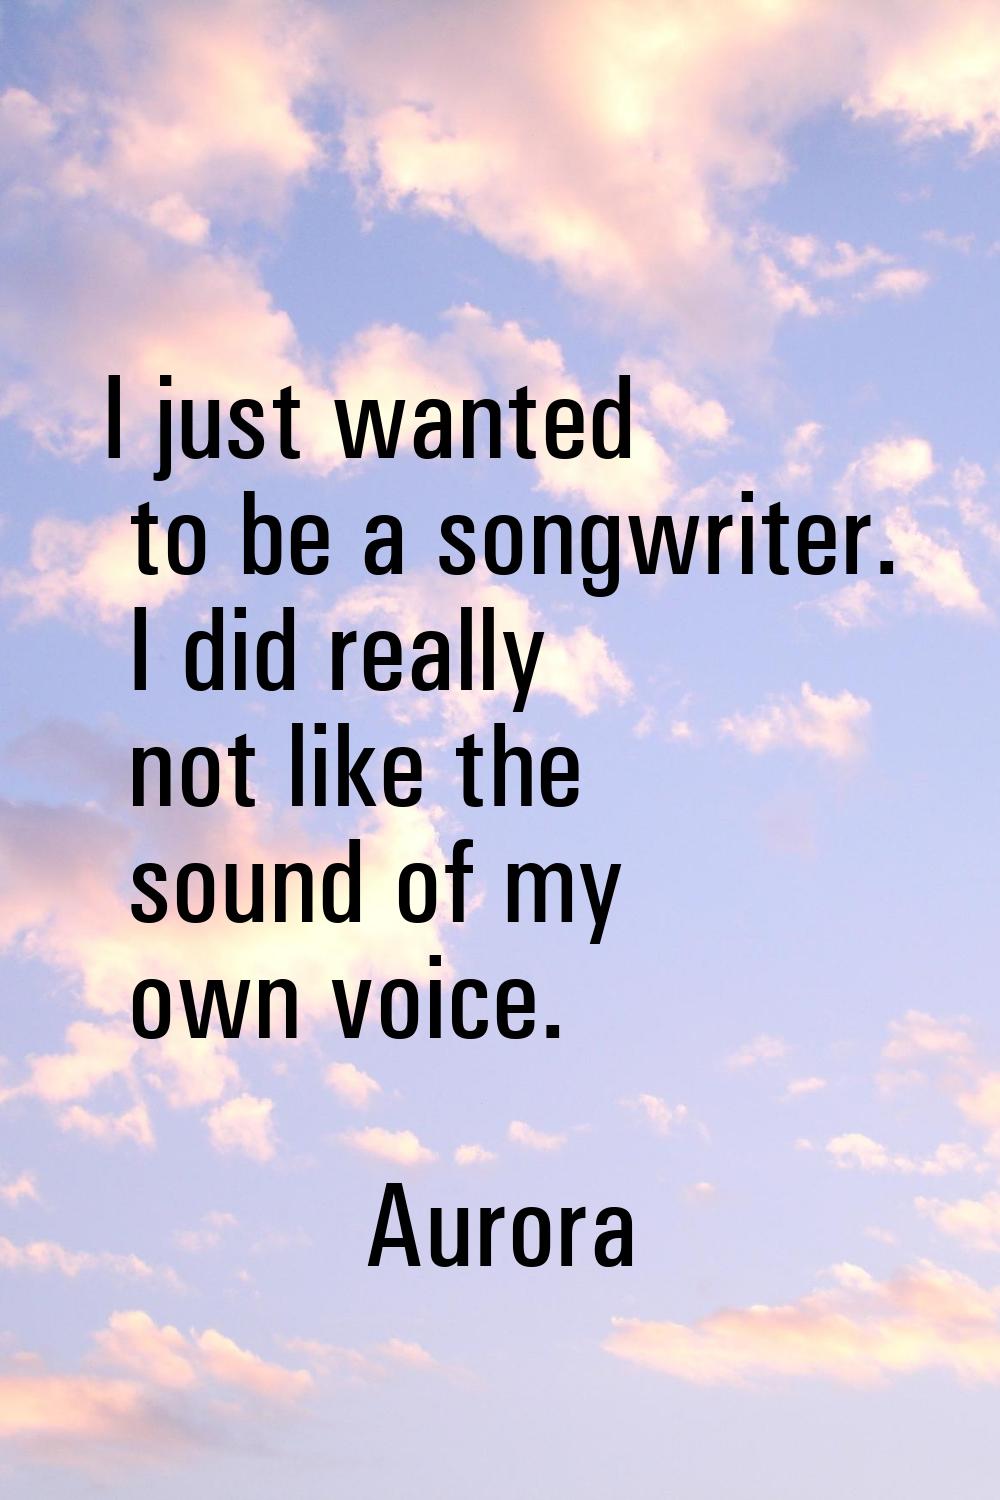 I just wanted to be a songwriter. I did really not like the sound of my own voice.